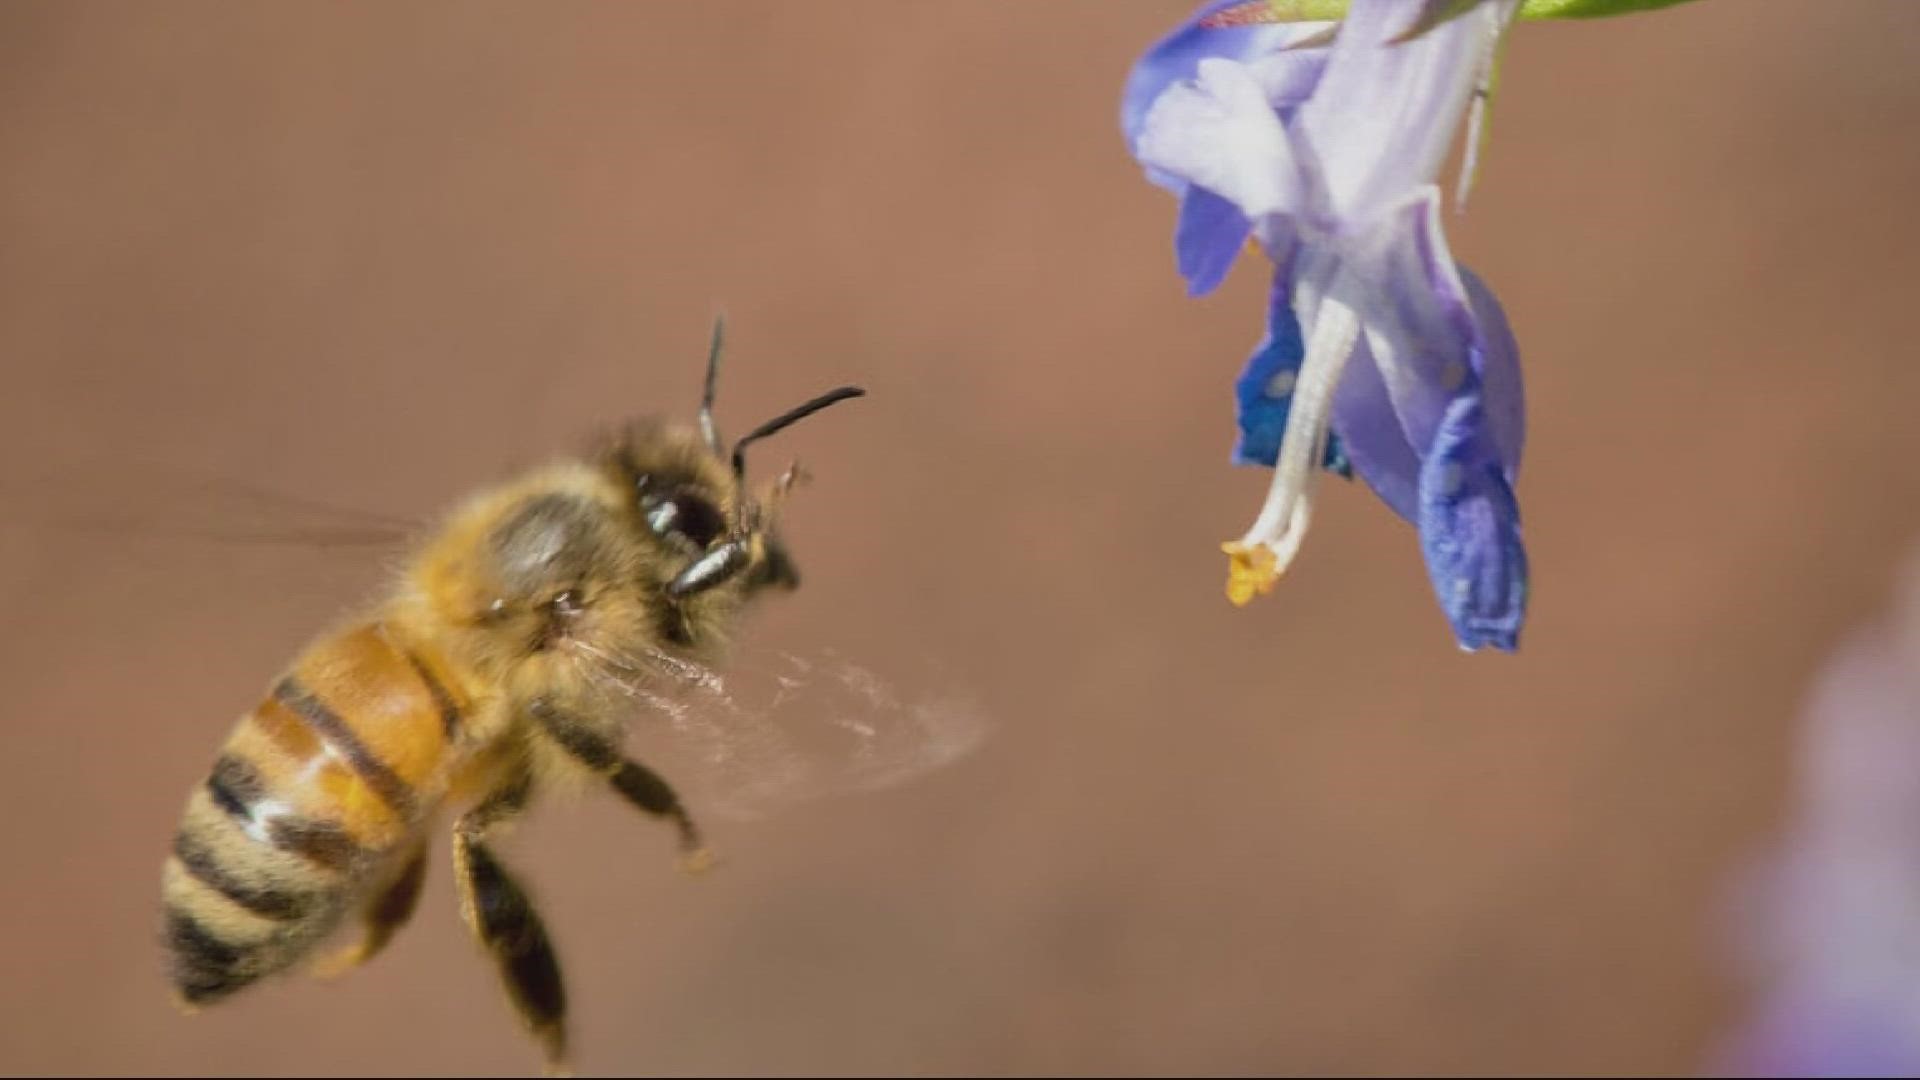 Bee populations are having a hard time. But a team from the UO is working to help the important pollinators make a comeback, using areas burned by wildfire to do it.